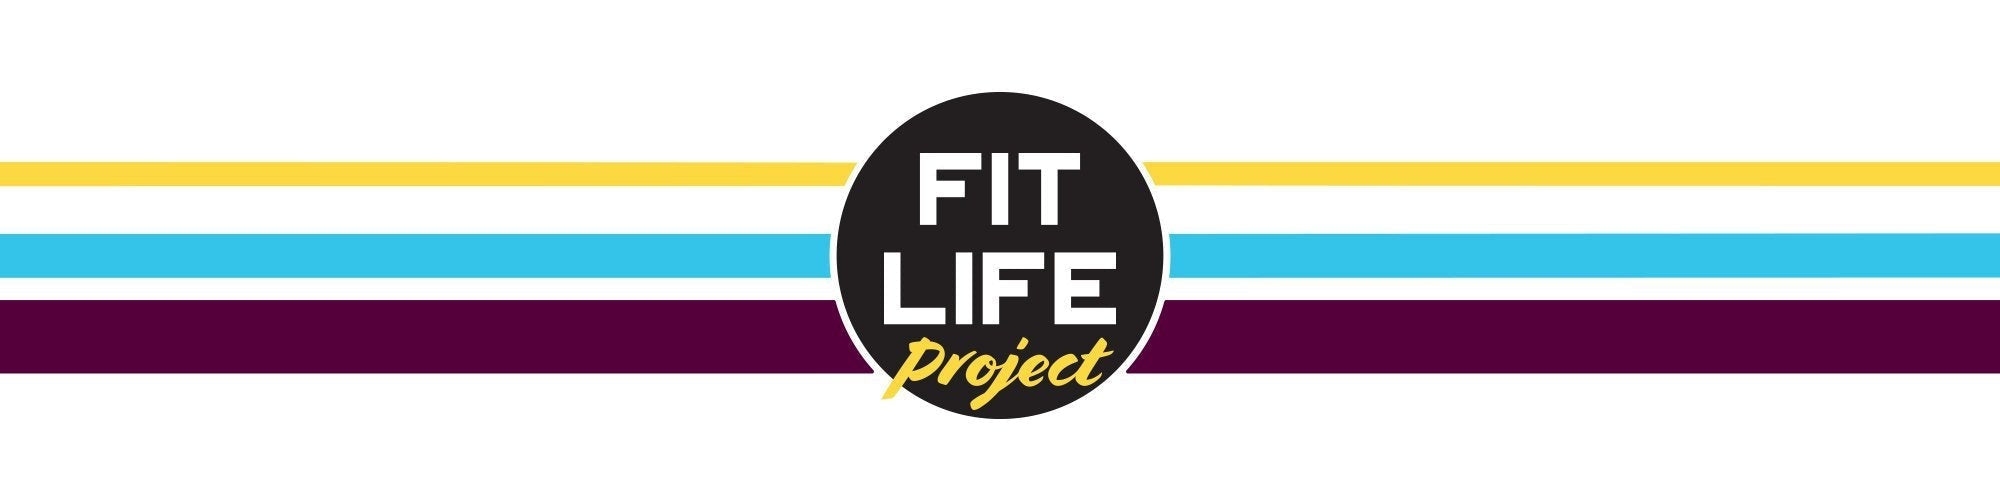 FitLife Project - Virtual Fitness Challenge Collection | Run The Edge